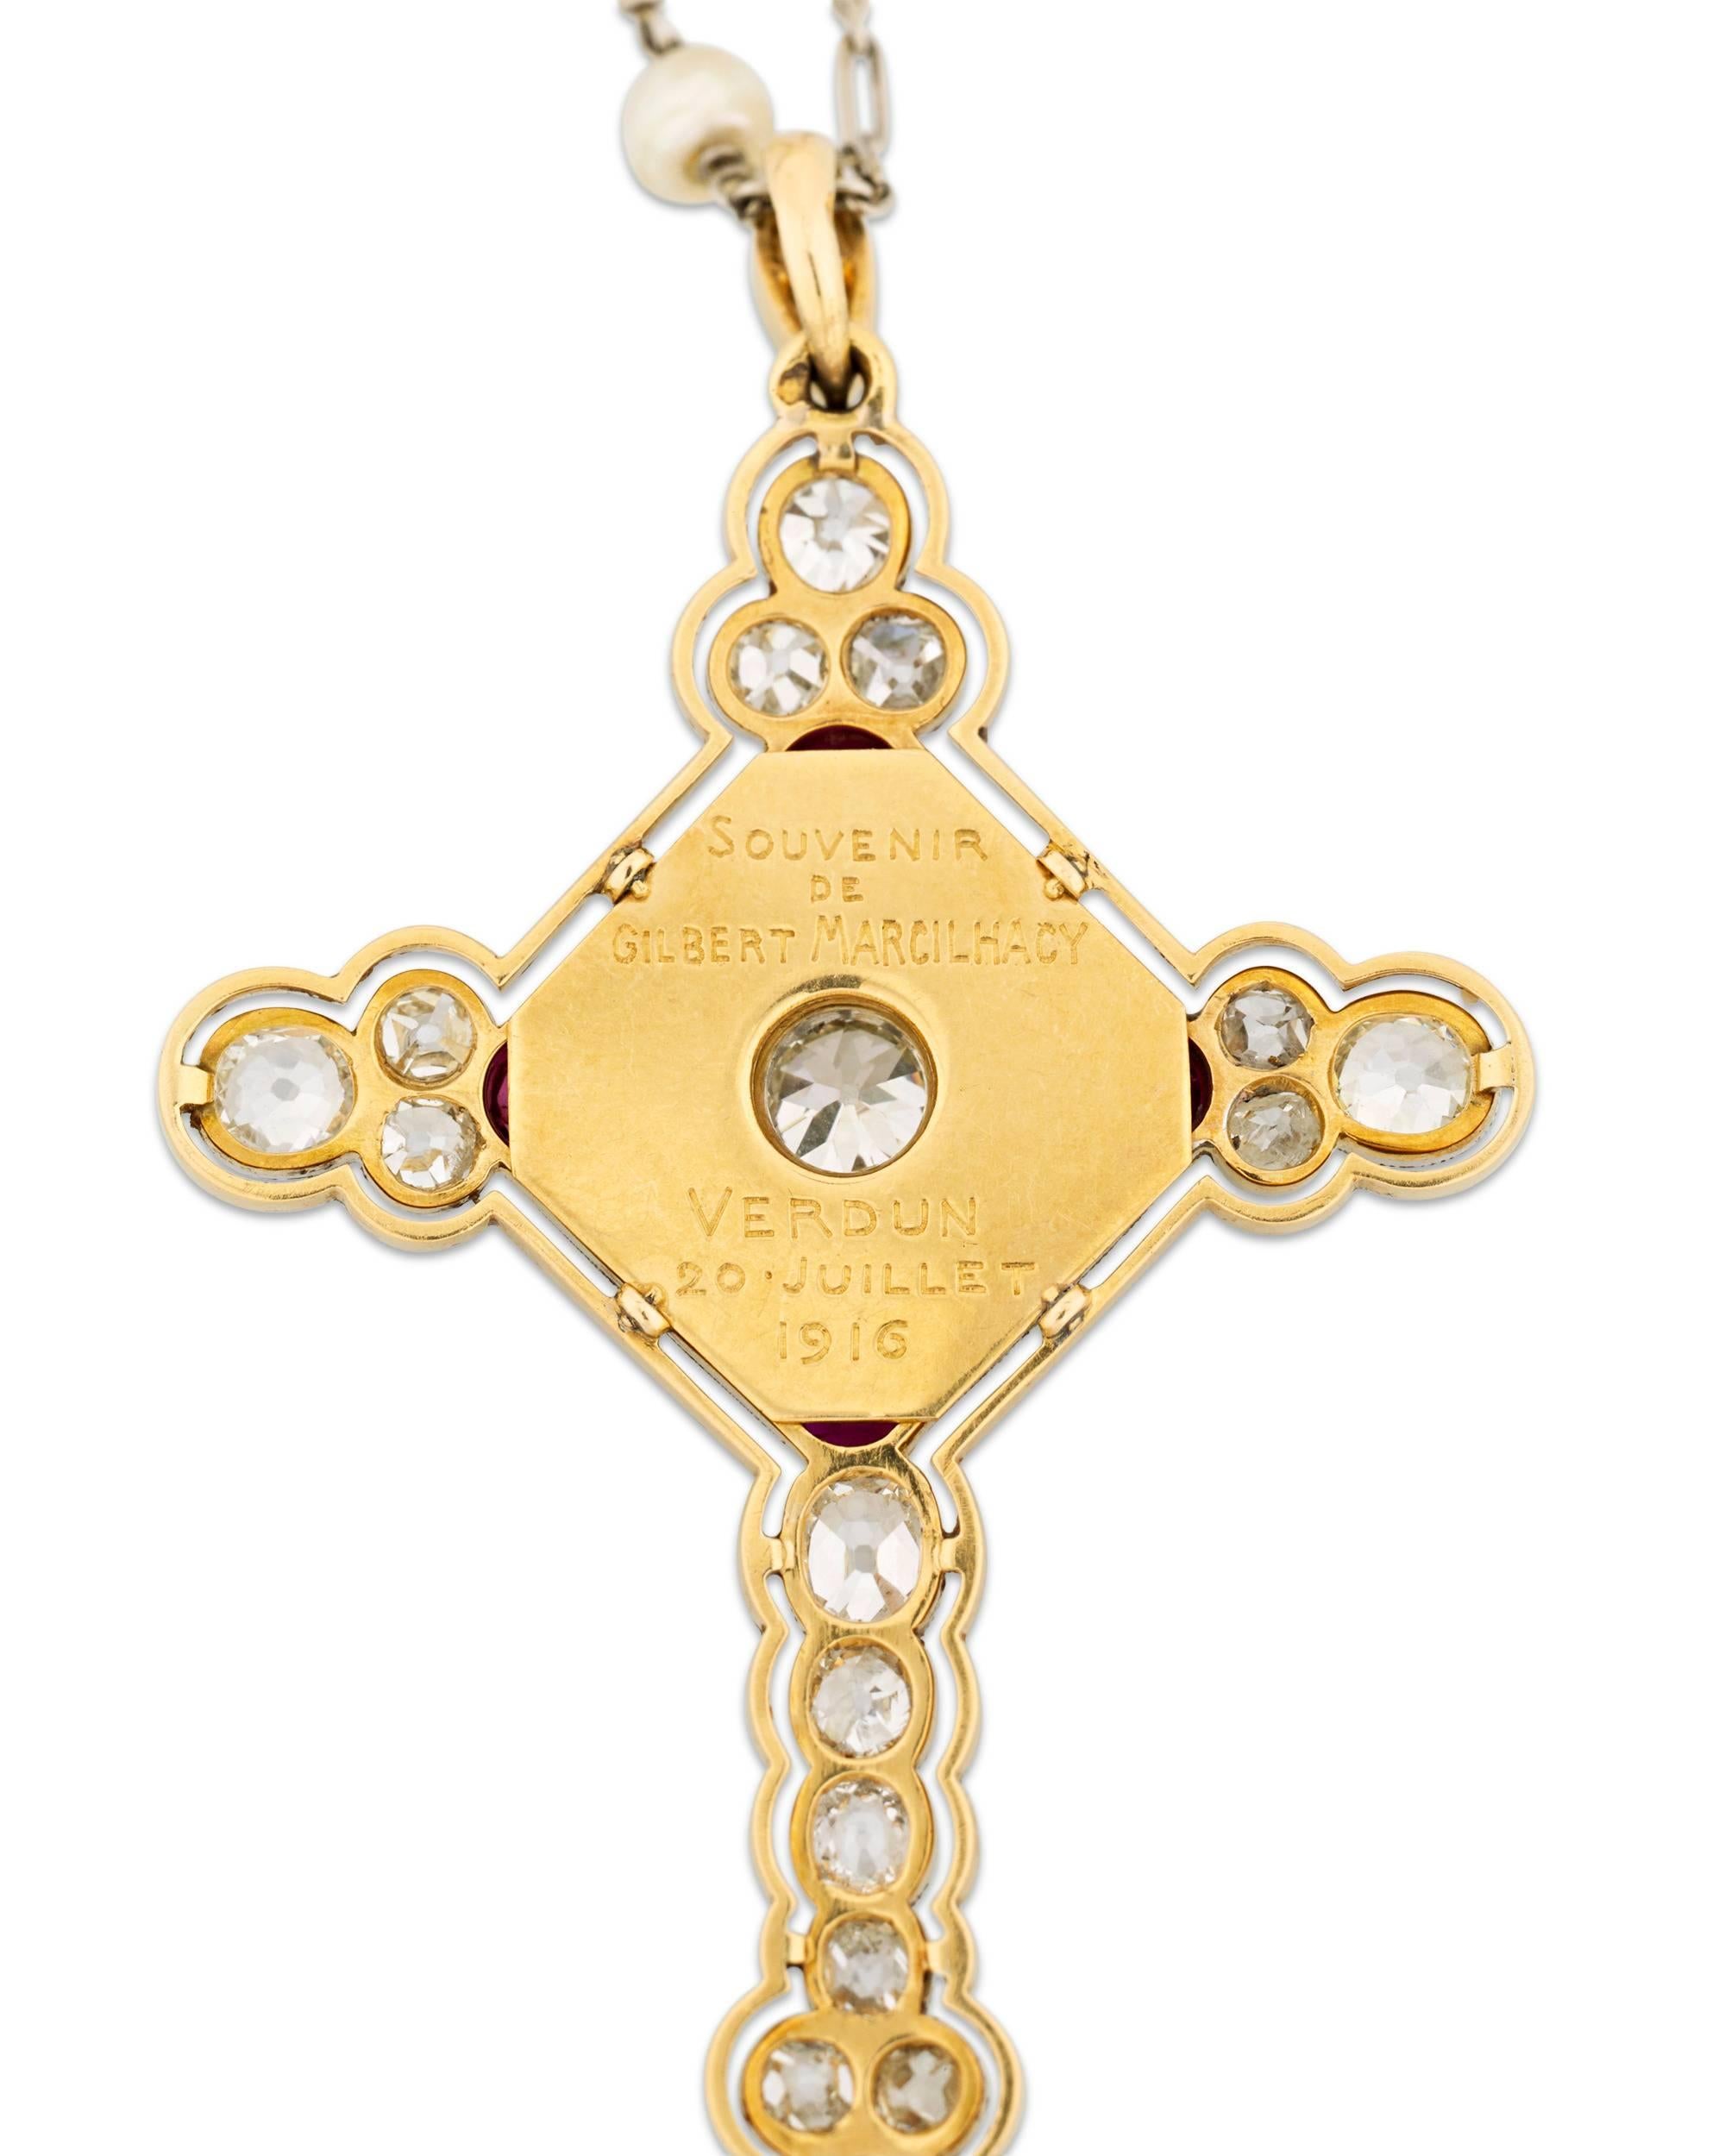 This ornate French cross pendant joins pearls, rubies, and diamonds to absolute perfection. Four teardrop rubies totaling approximately 2.00 carats are paired with four pearls at the pendant's center, while approximately 4.00 total carats of